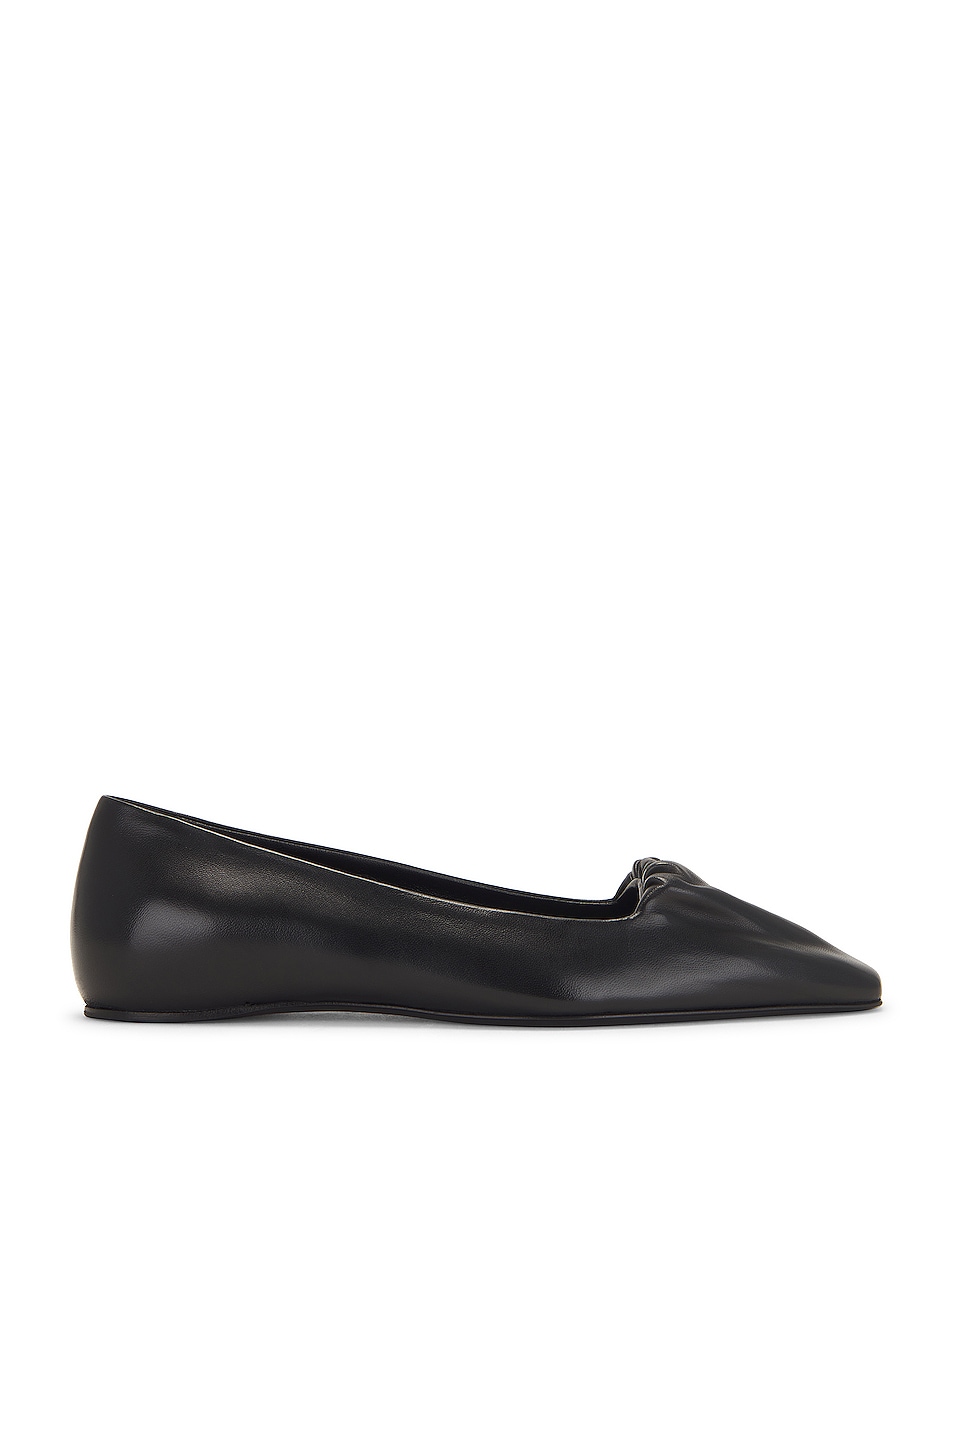 Image 1 of Toteme The Gathered Ballerina Flat in Black